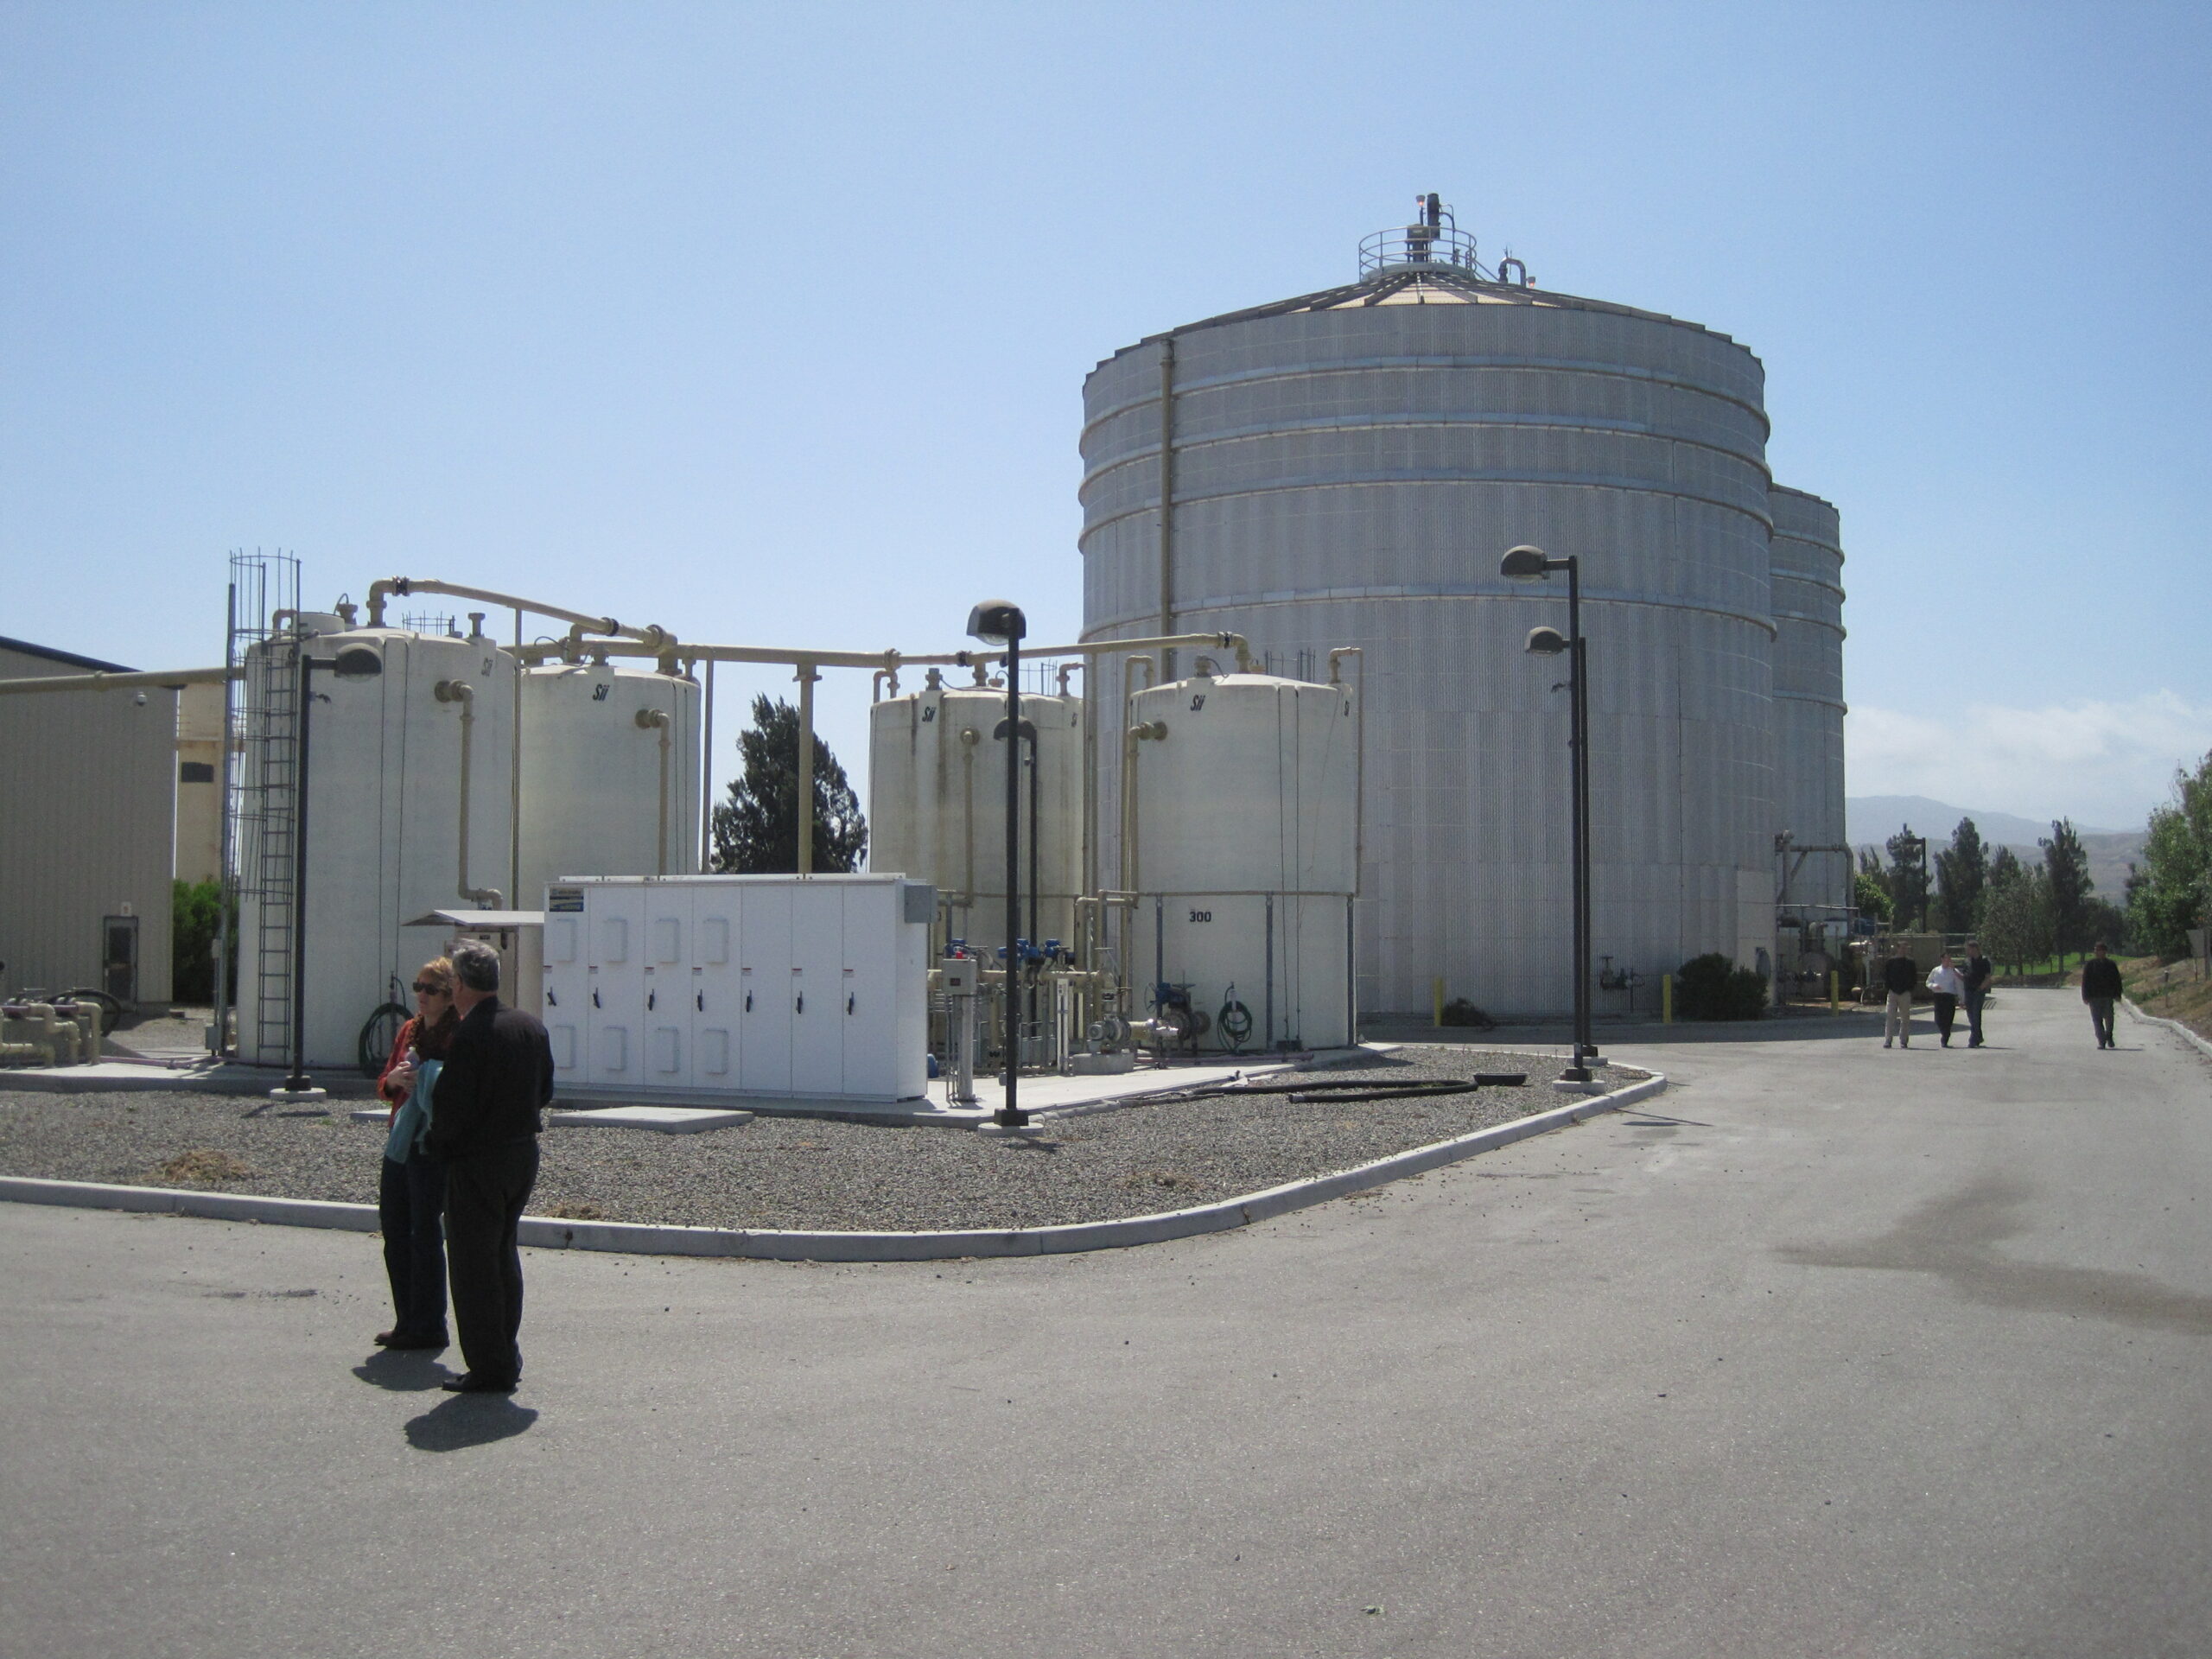 Image of an anaerobic digestion facility